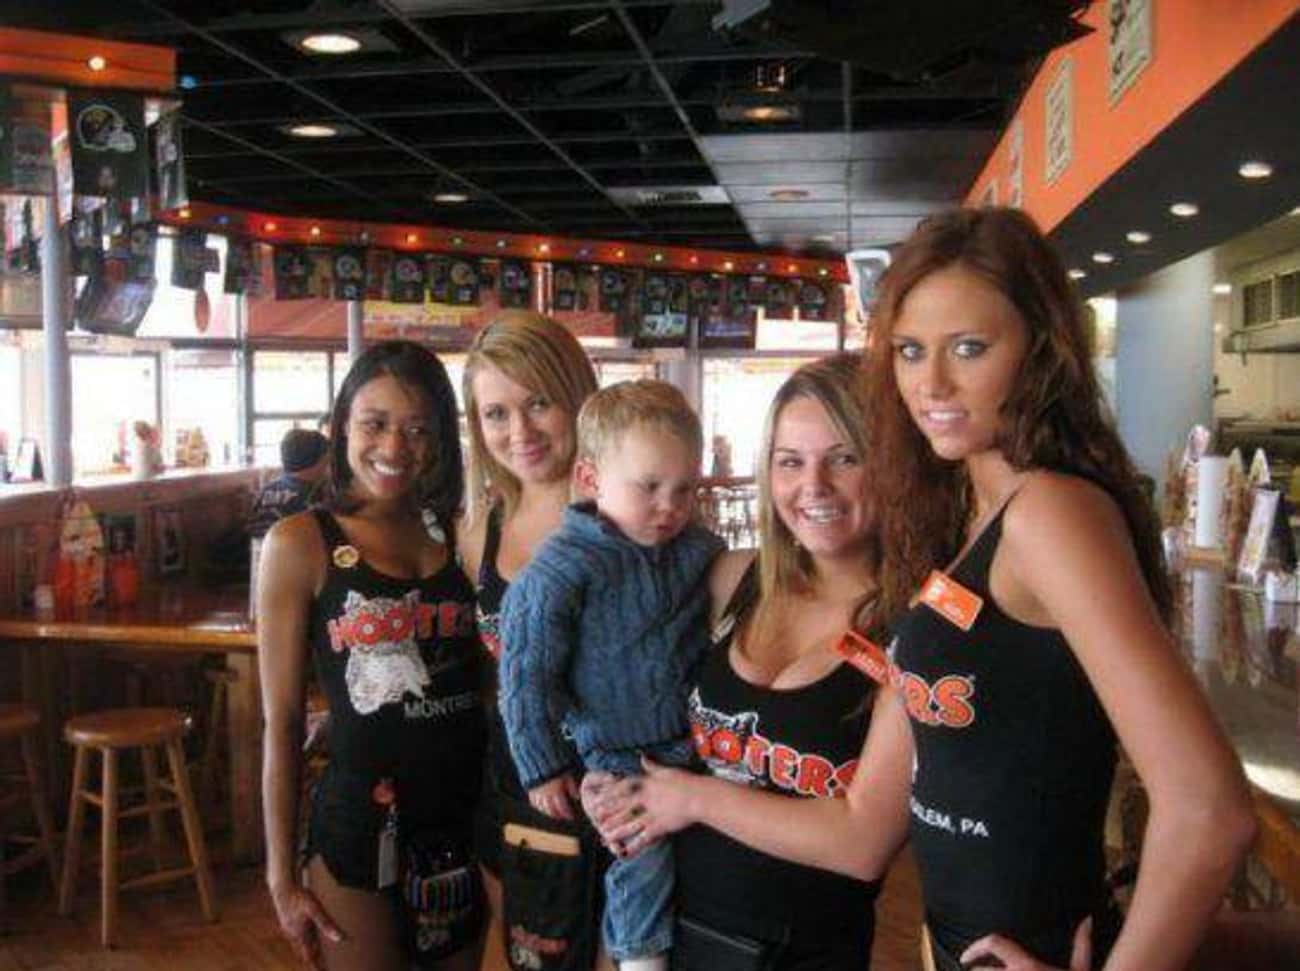 The Lunch Menu at Hooters